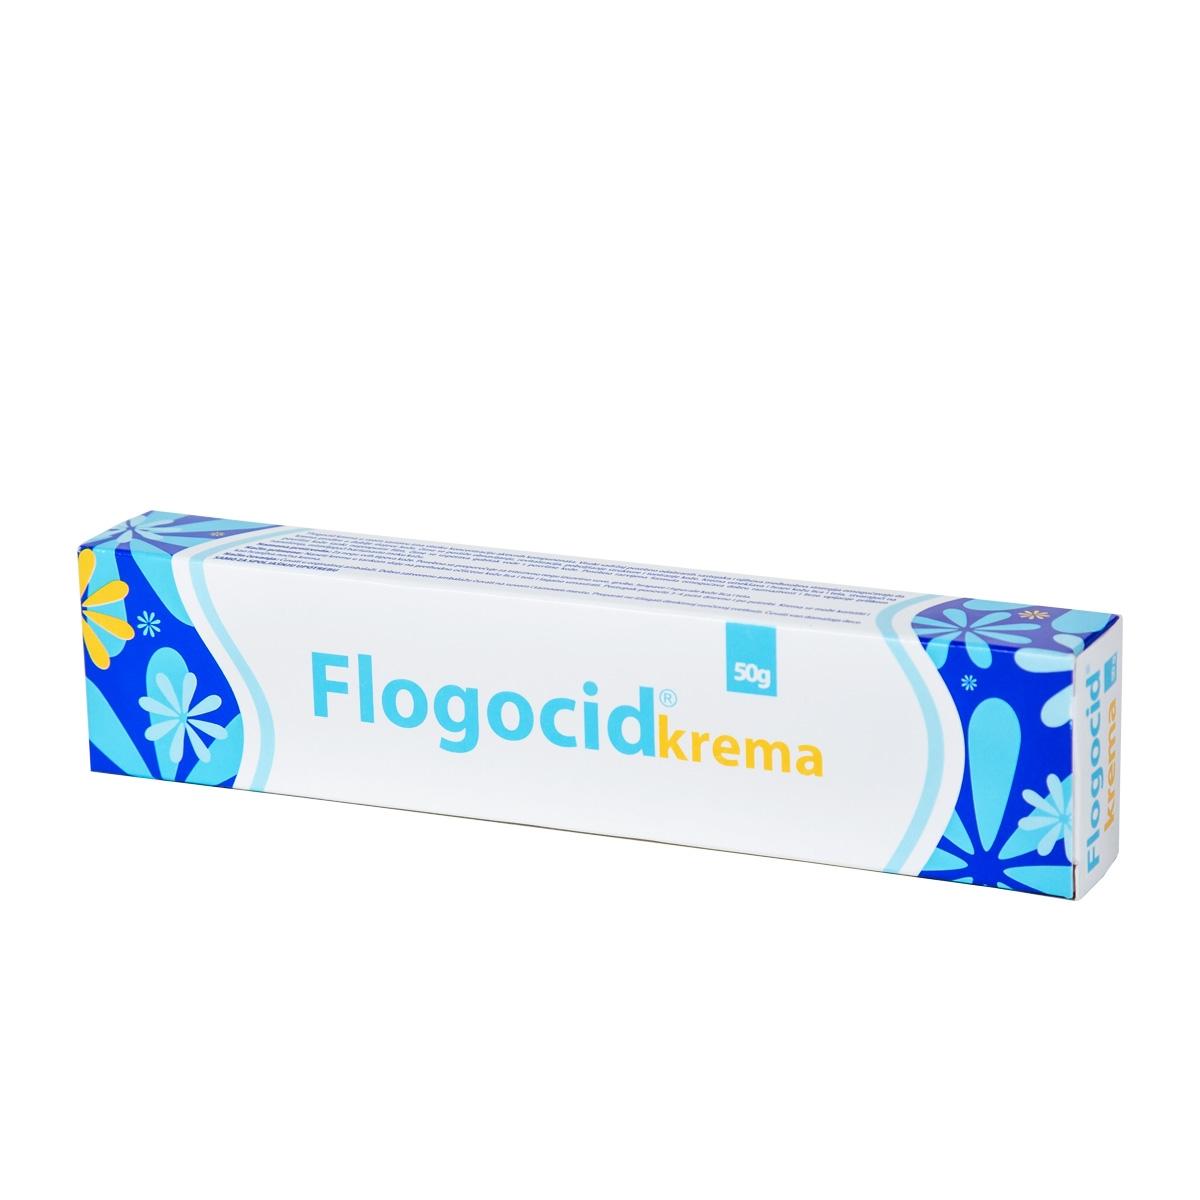 Selected image for UNIMEDICA Flogocid mast 50g